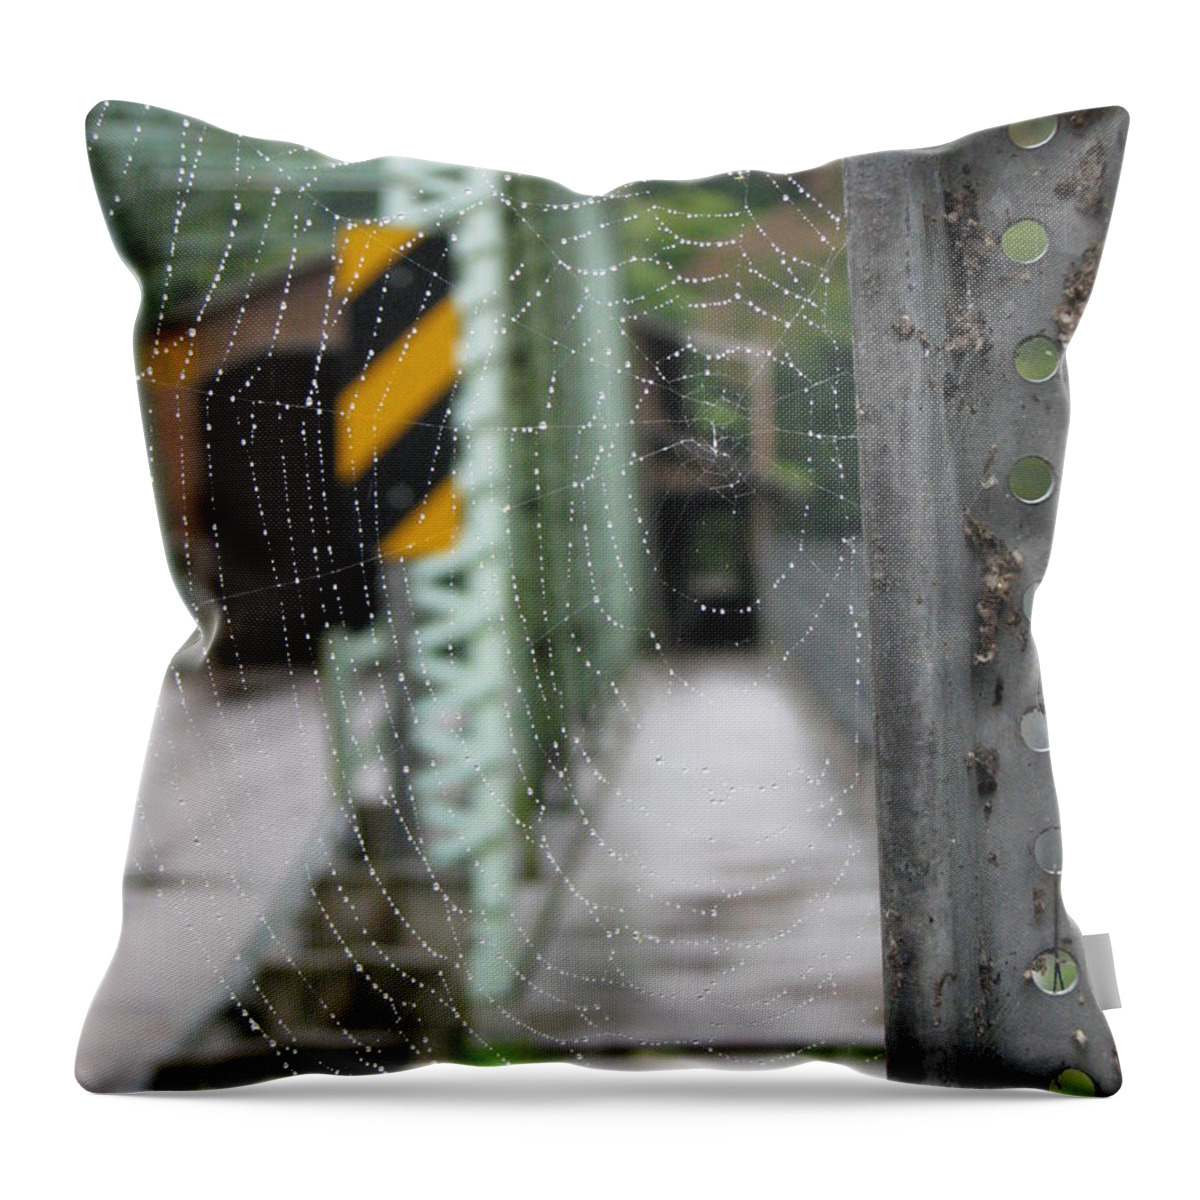 Spider Web Throw Pillow featuring the photograph Spider Web by Michael Krek